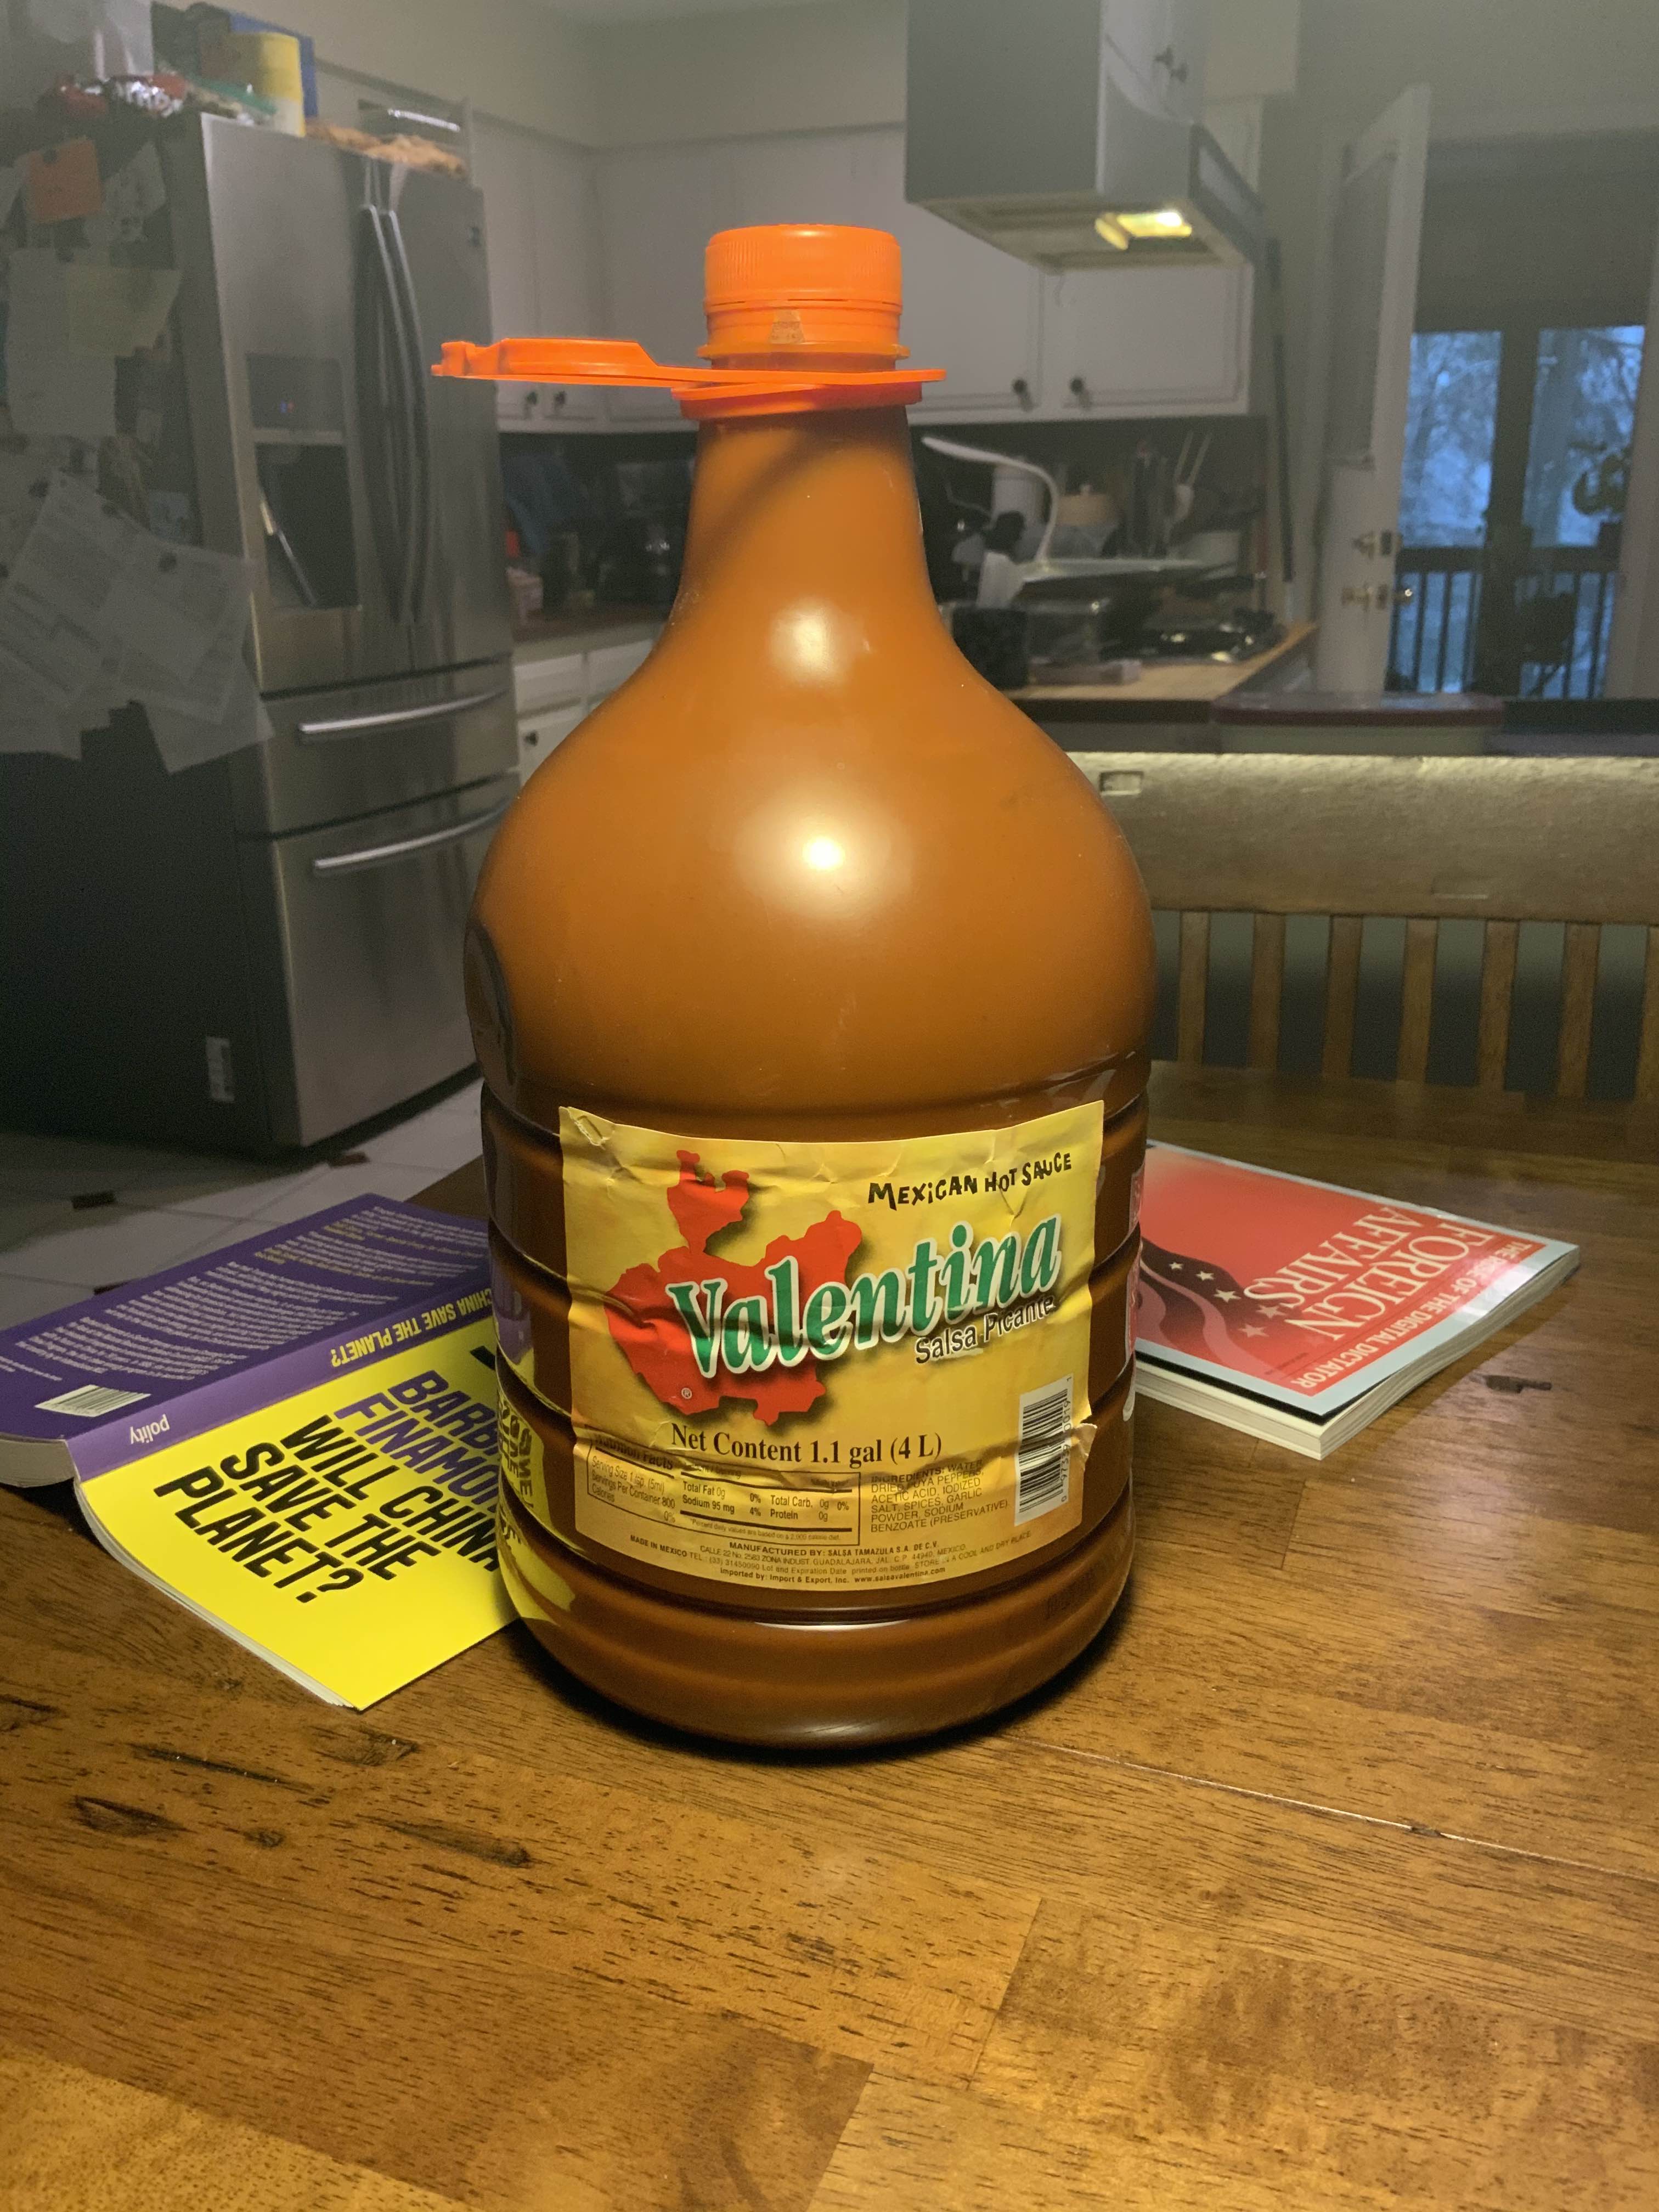 Kaiser Kuo on X: @CamFreck @AnnaGHughes You must find a way to get some.  Or there's always Valentina, which is comparable to Cholula. I bought this  1.1 gallon (4 liter) bottle of